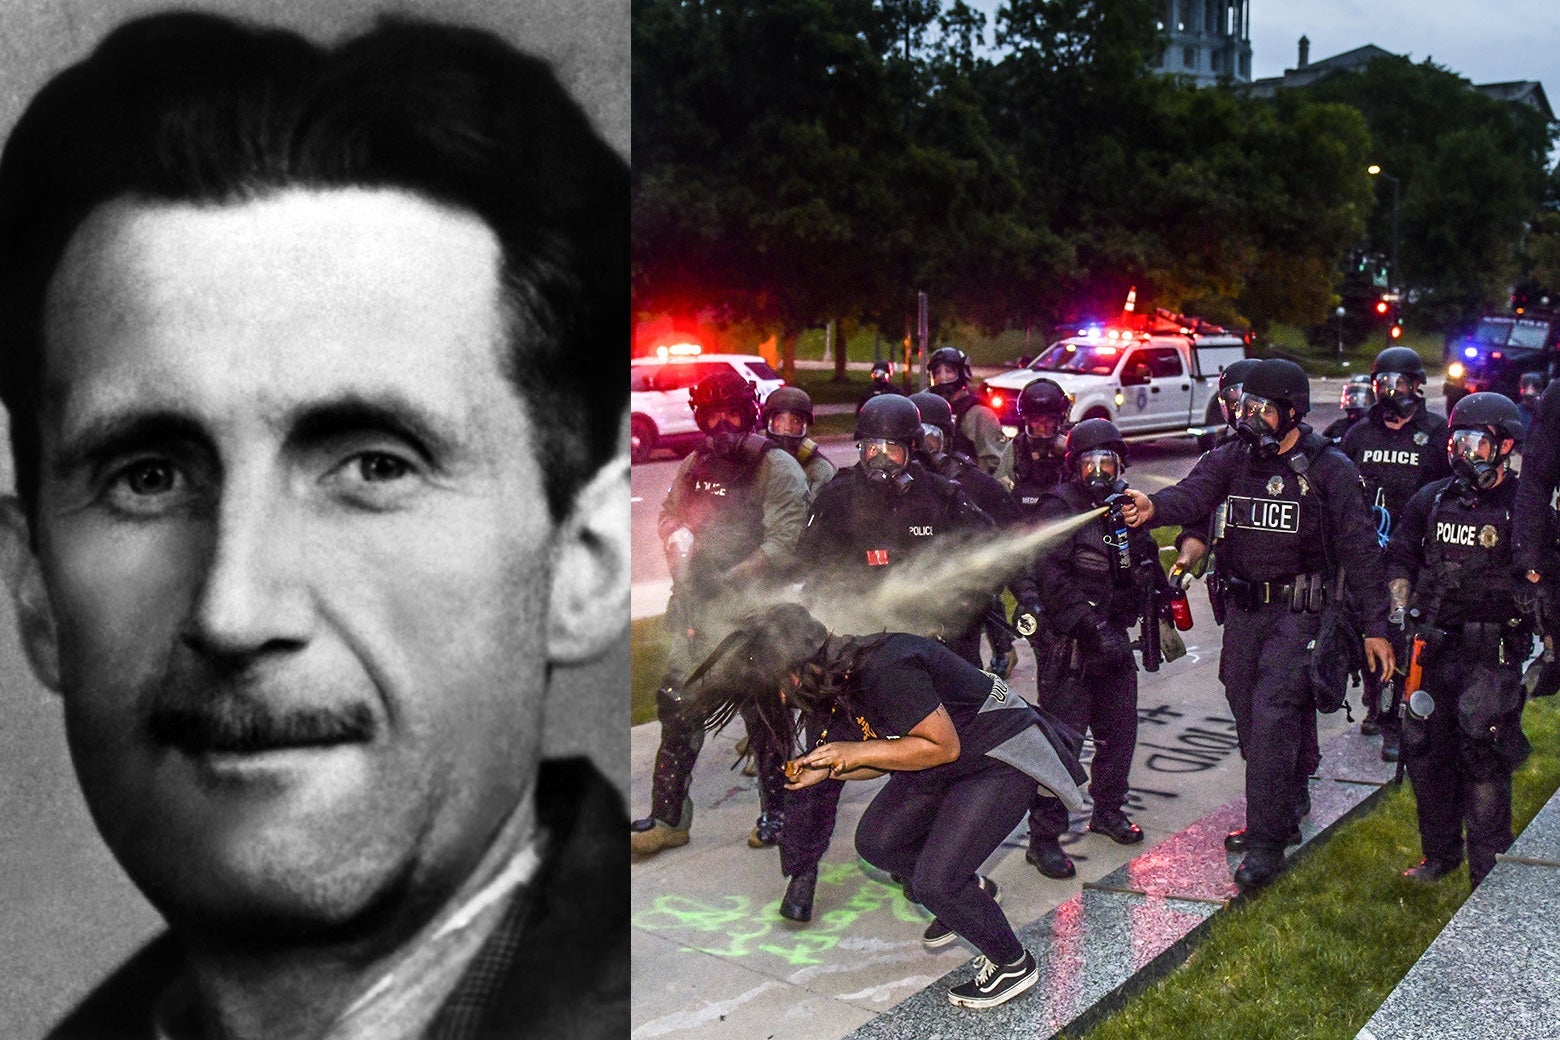 George Orwell and a recent image of police using pepper spray on a protester.